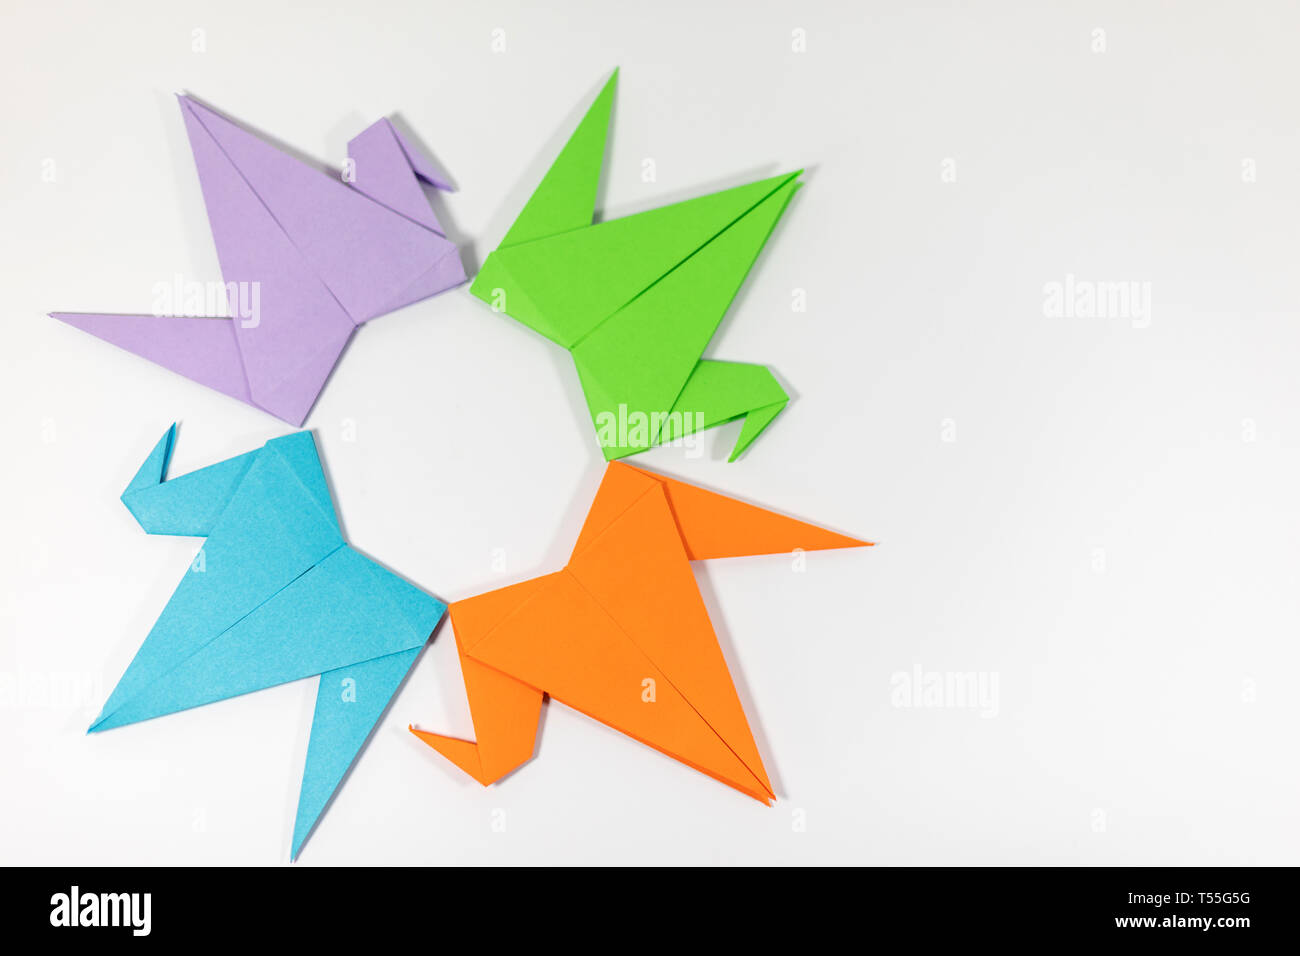 Hand folded bright coloured origami paper cranes arranges in a circular pattern isolated on a white background Stock Photo